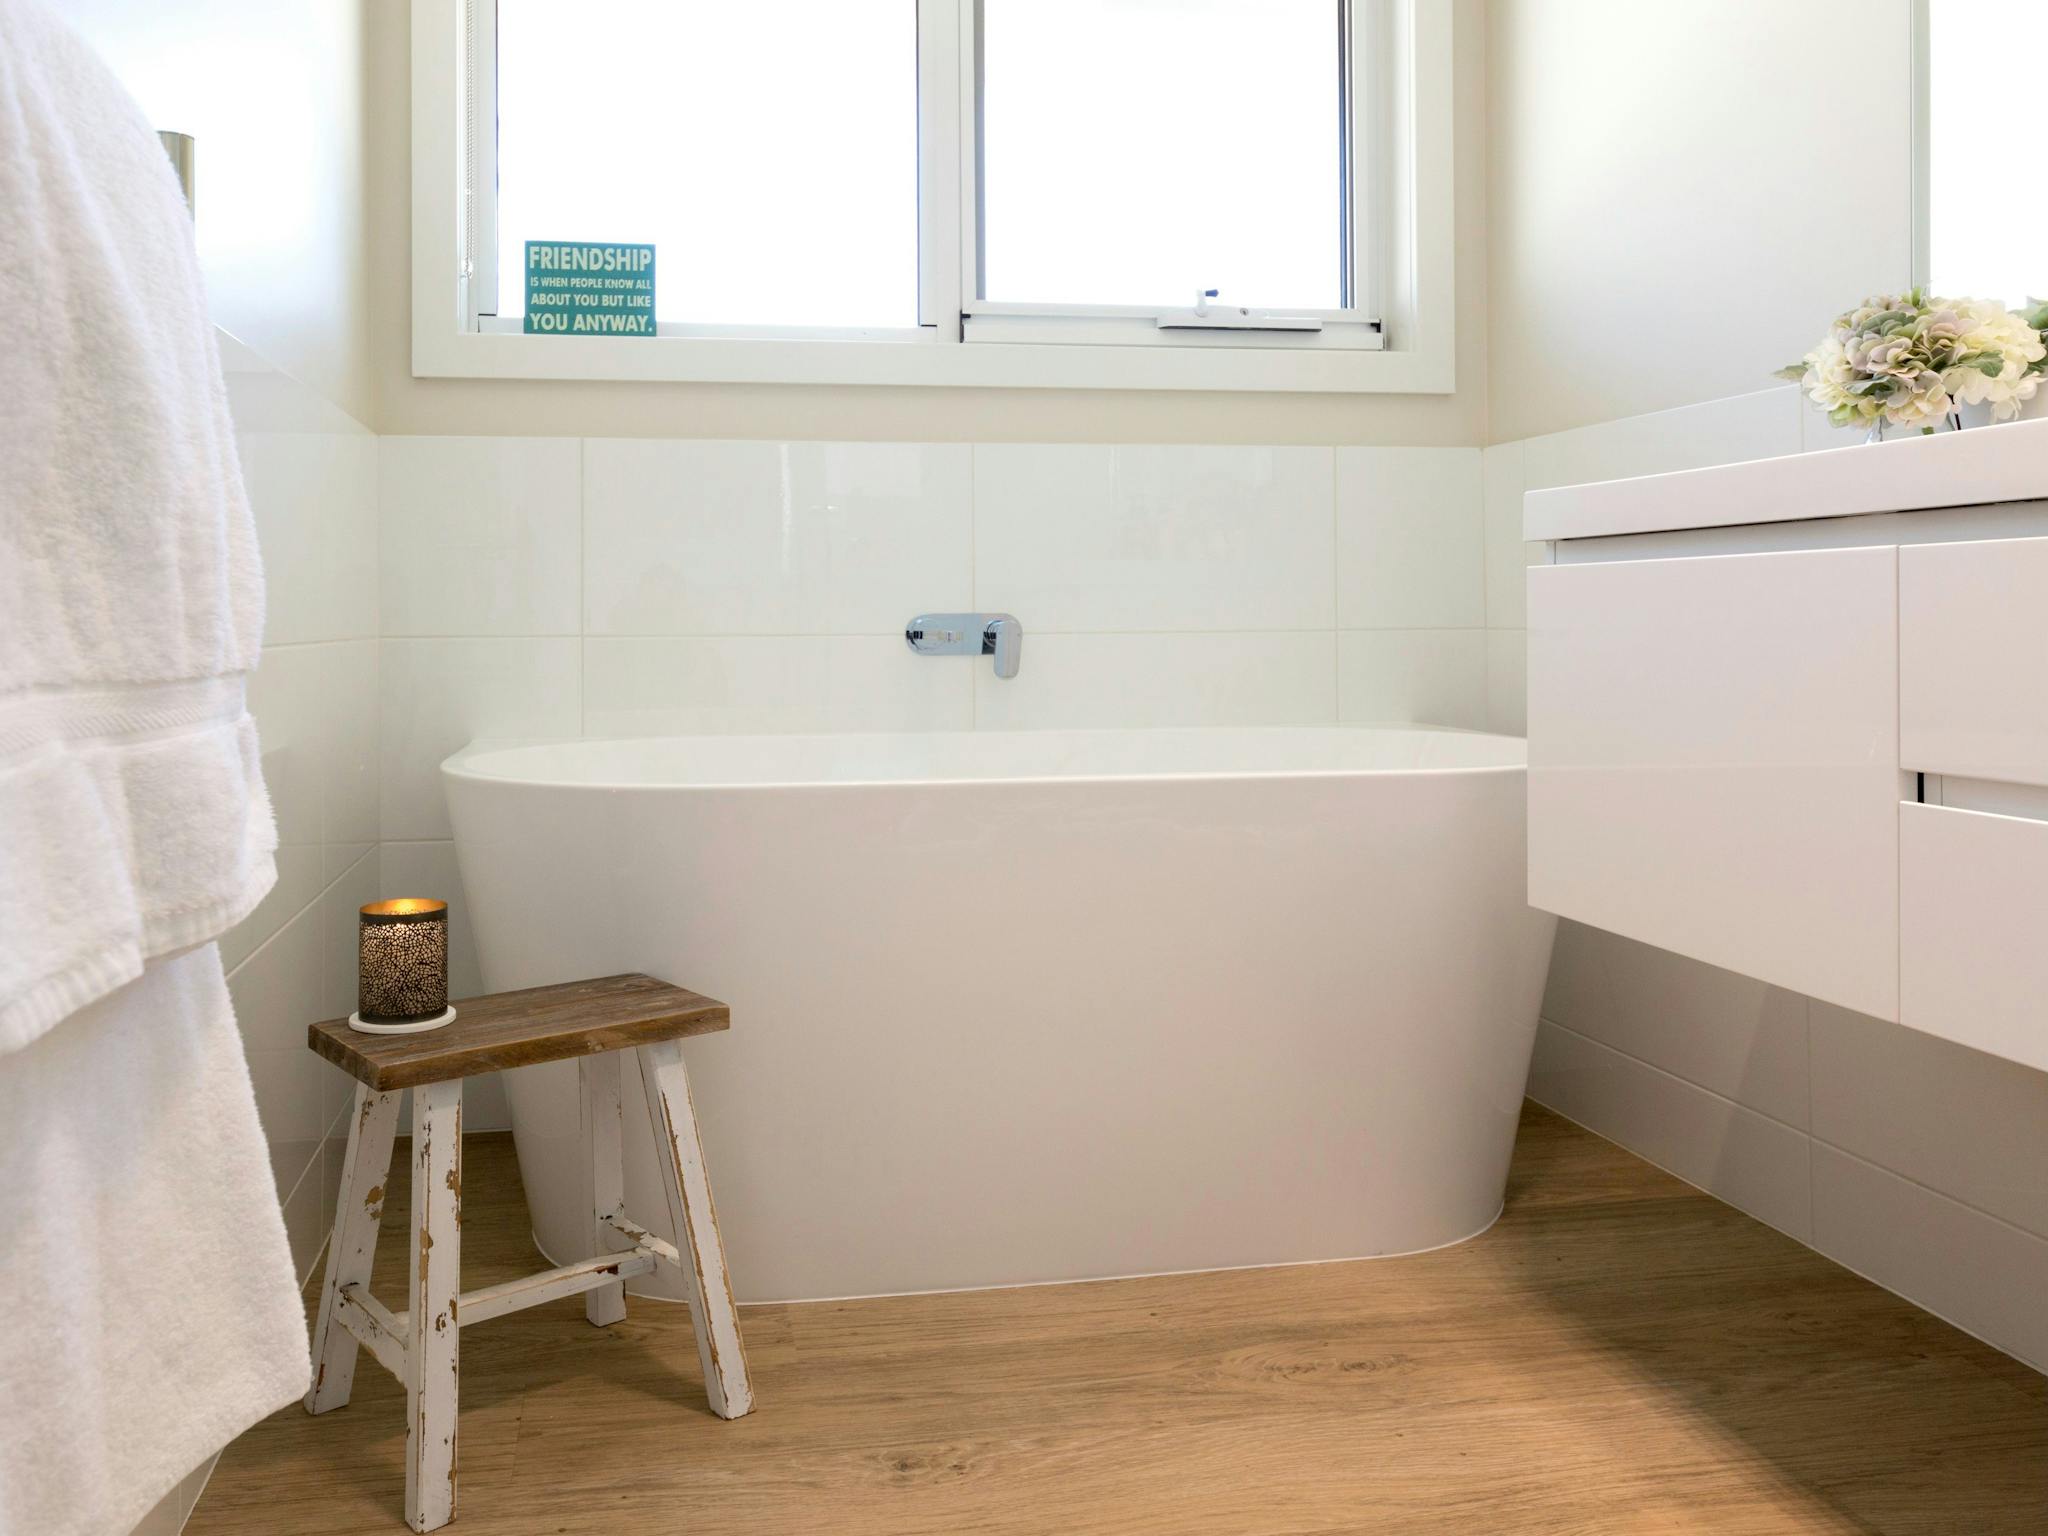 Spring Homes deepset bath perfect for a day of adventure